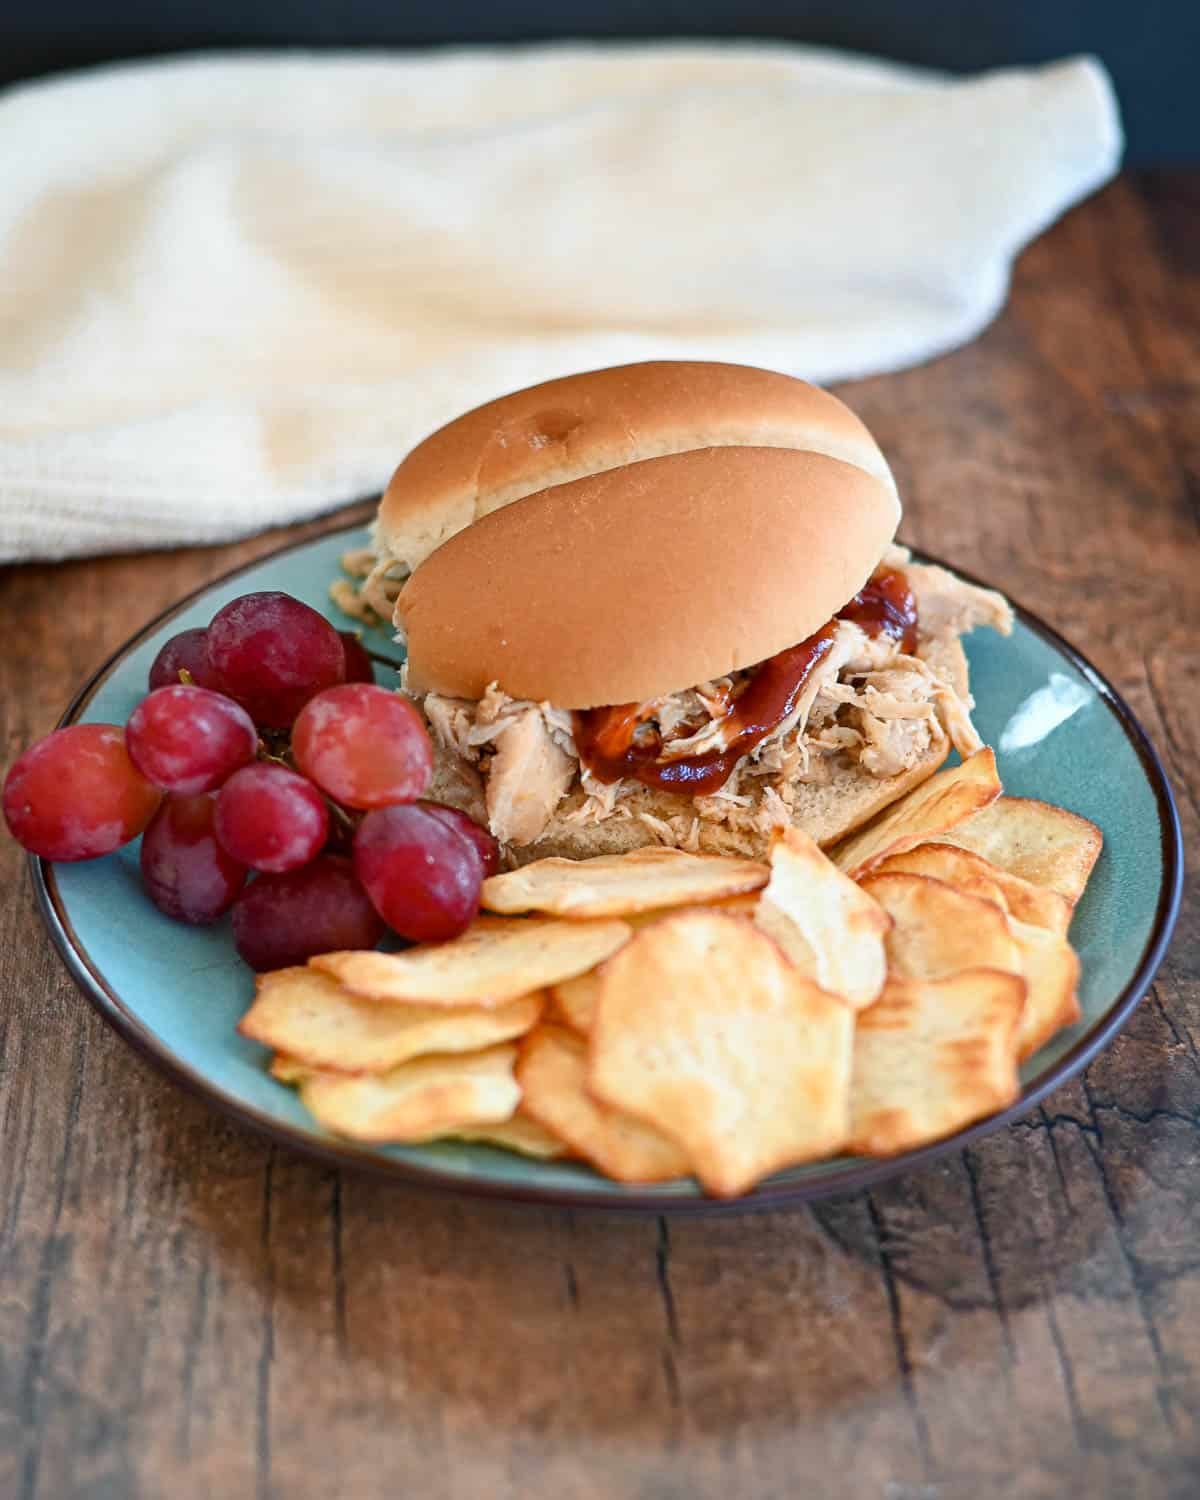 A shredded chicken sandwich next to chips and grapes on a plate.